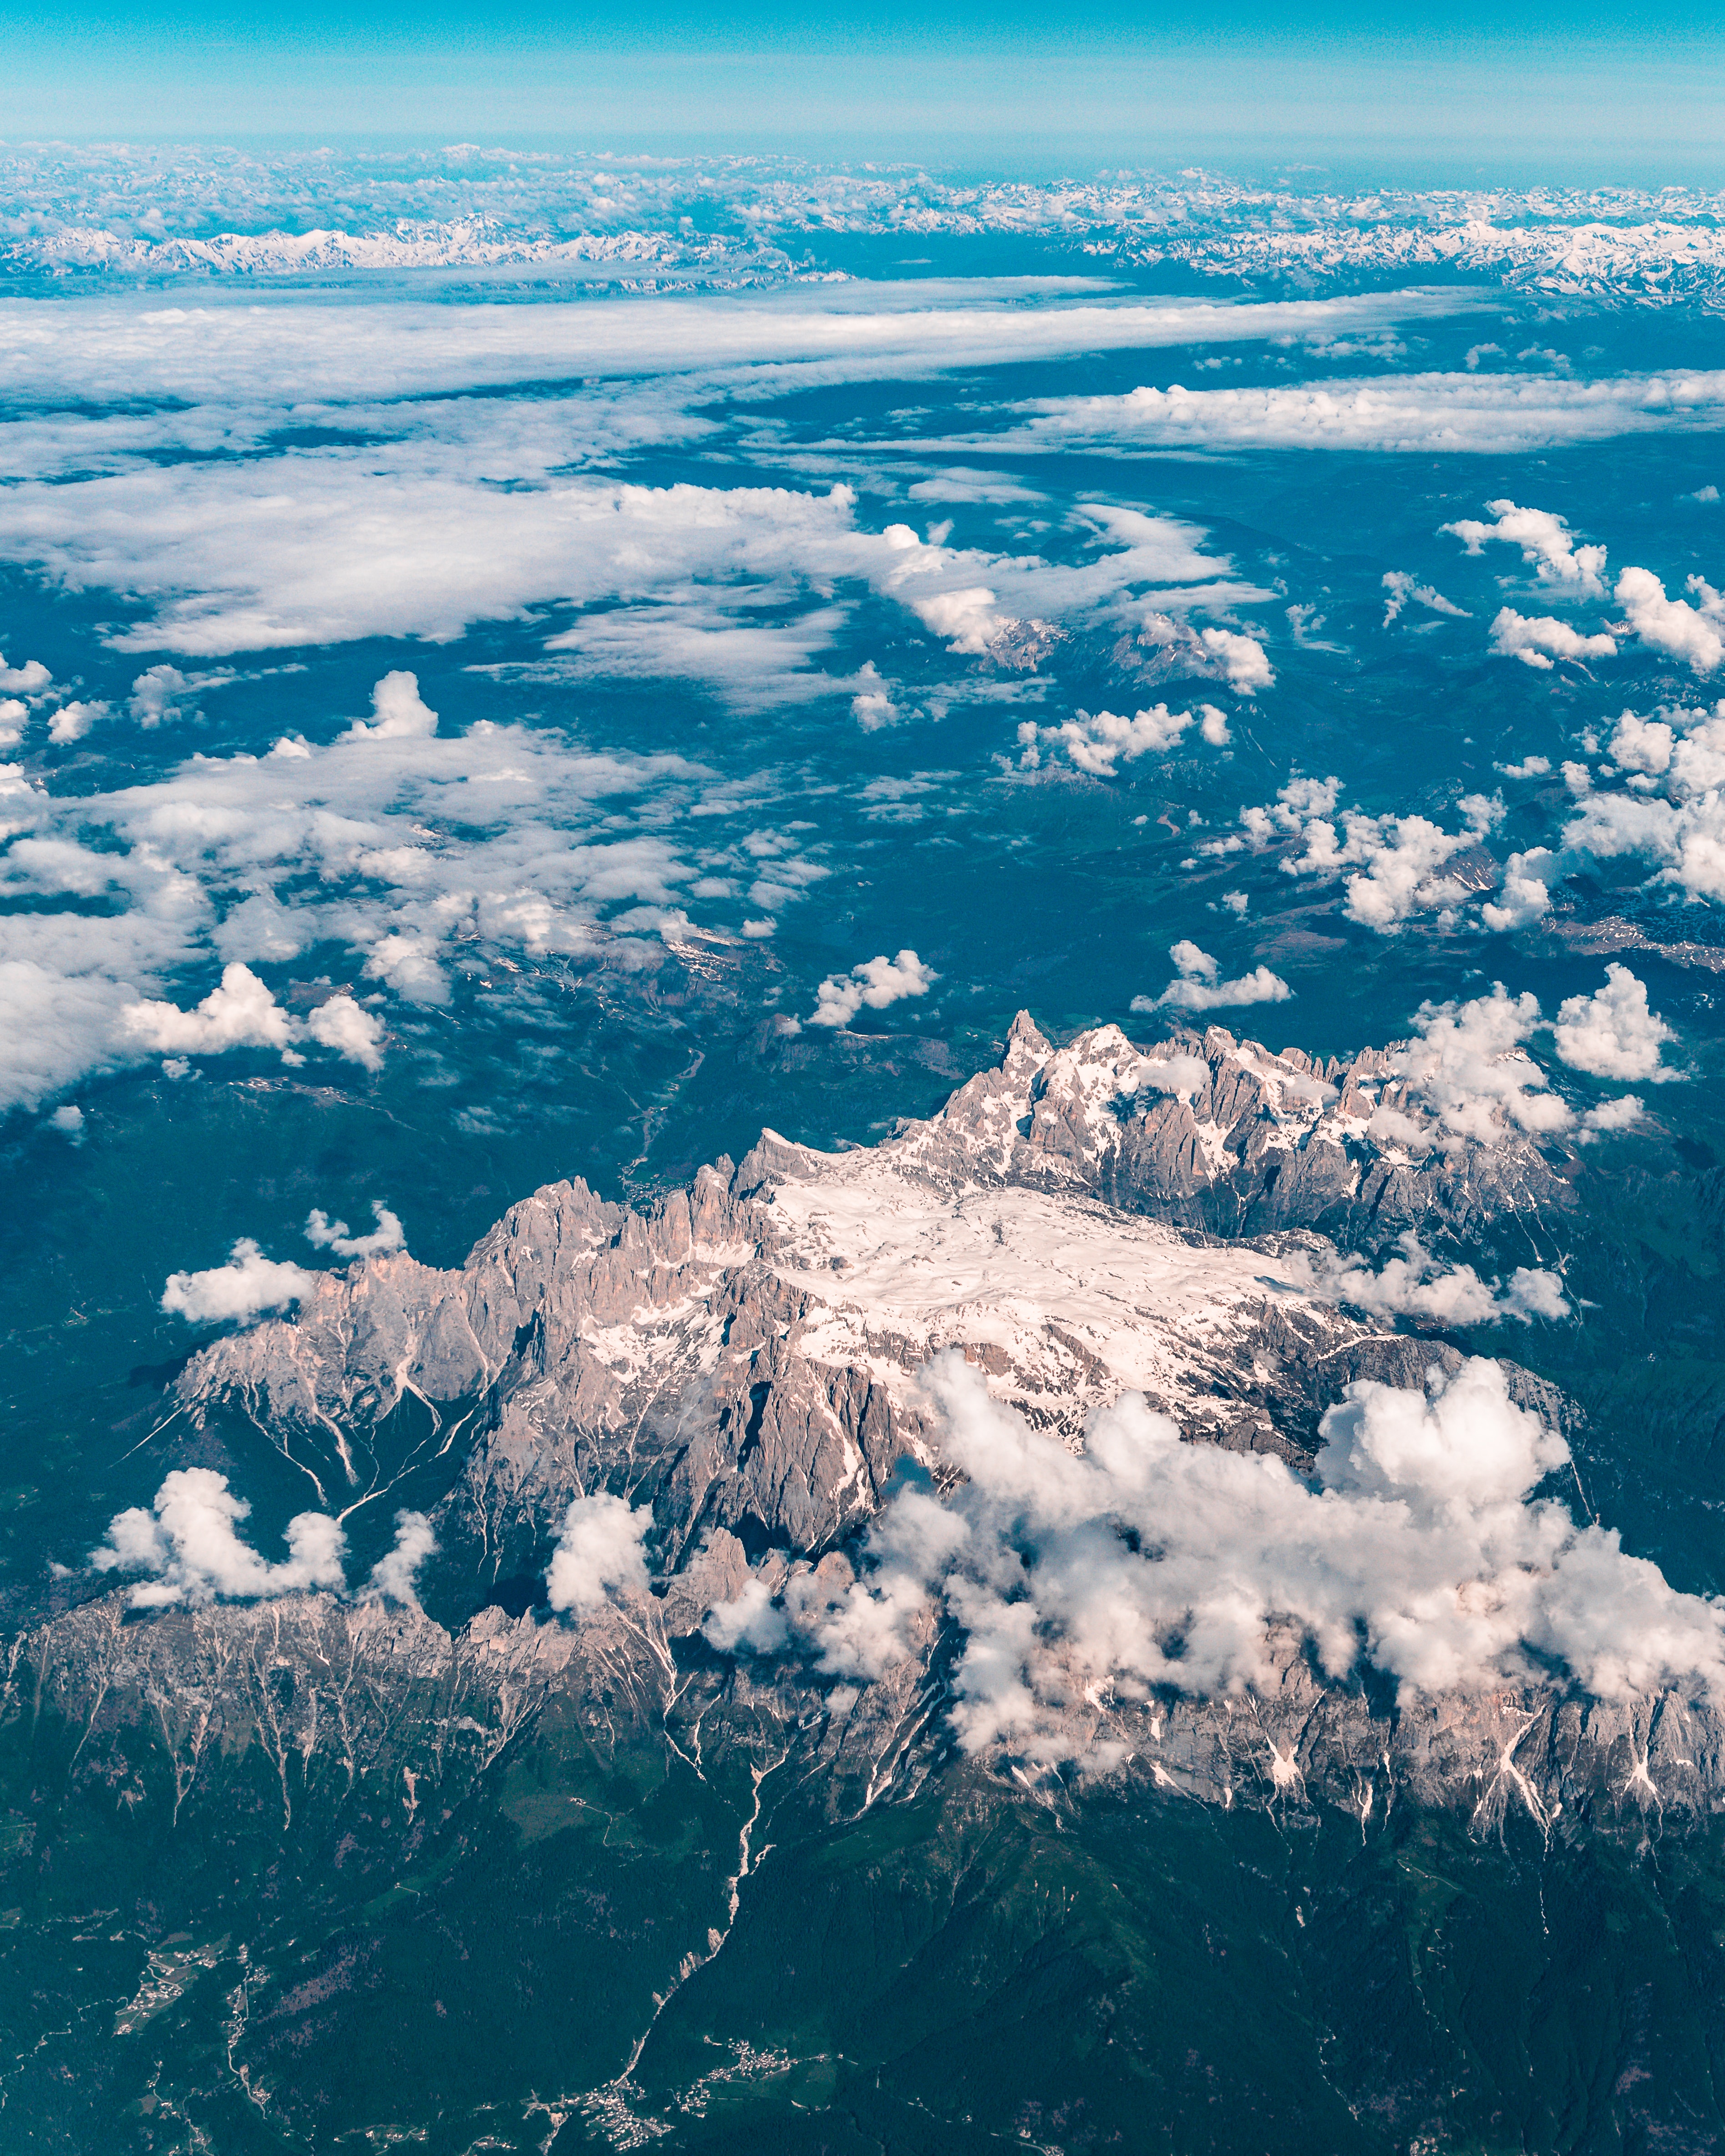 Wallpaper for mobile devices clouds, mountains, view from above, nature